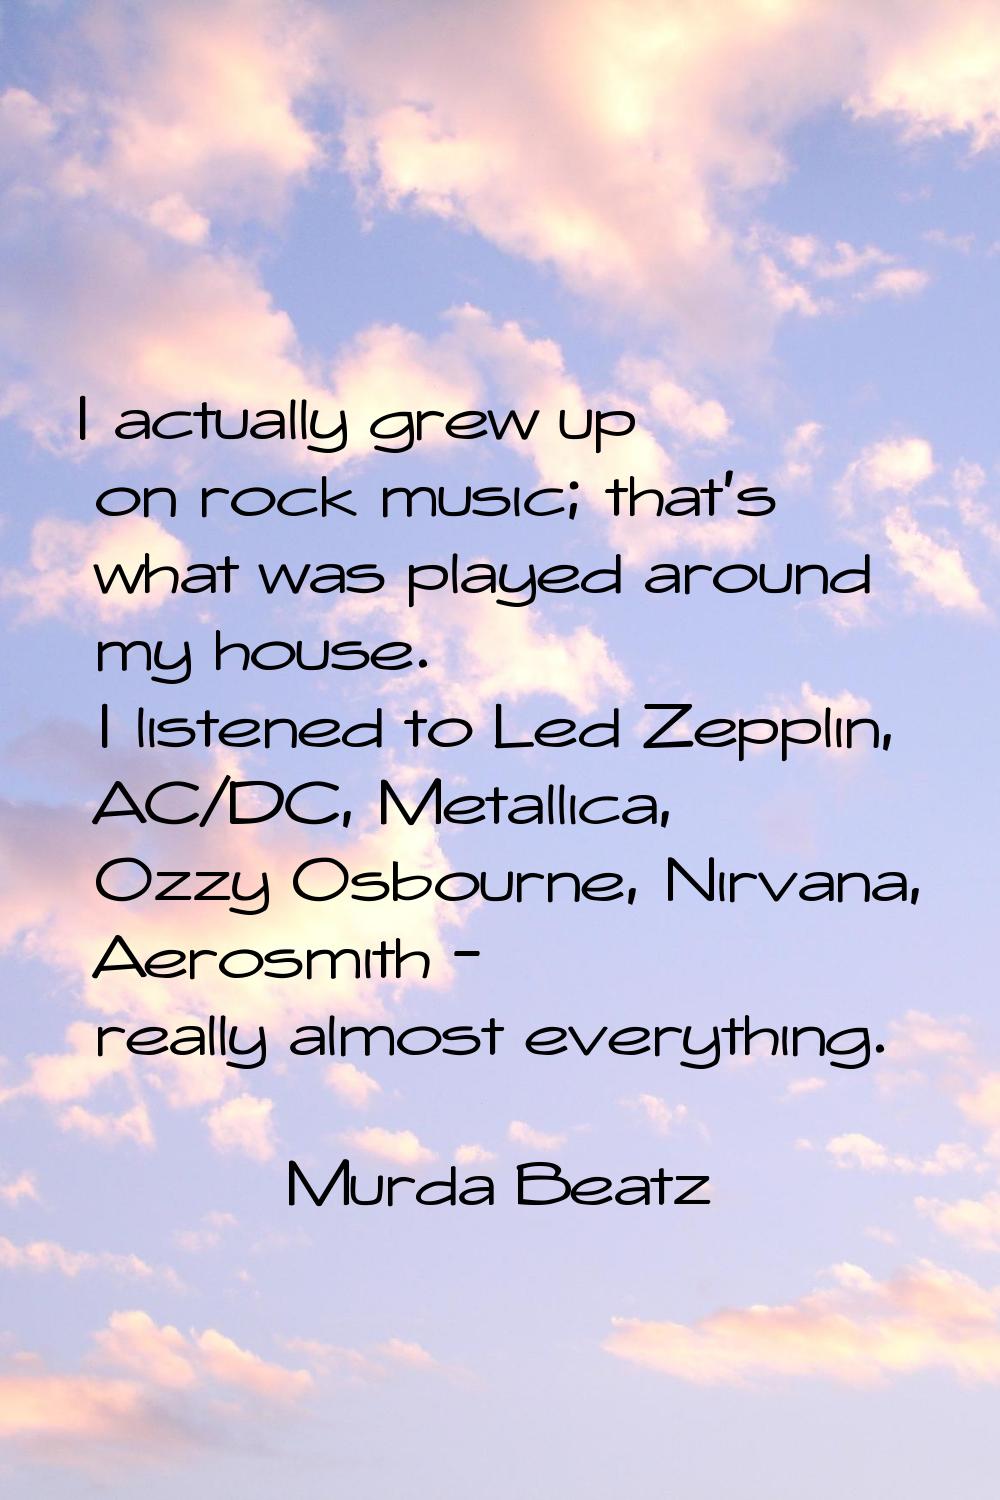 I actually grew up on rock music; that's what was played around my house. I listened to Led Zepplin